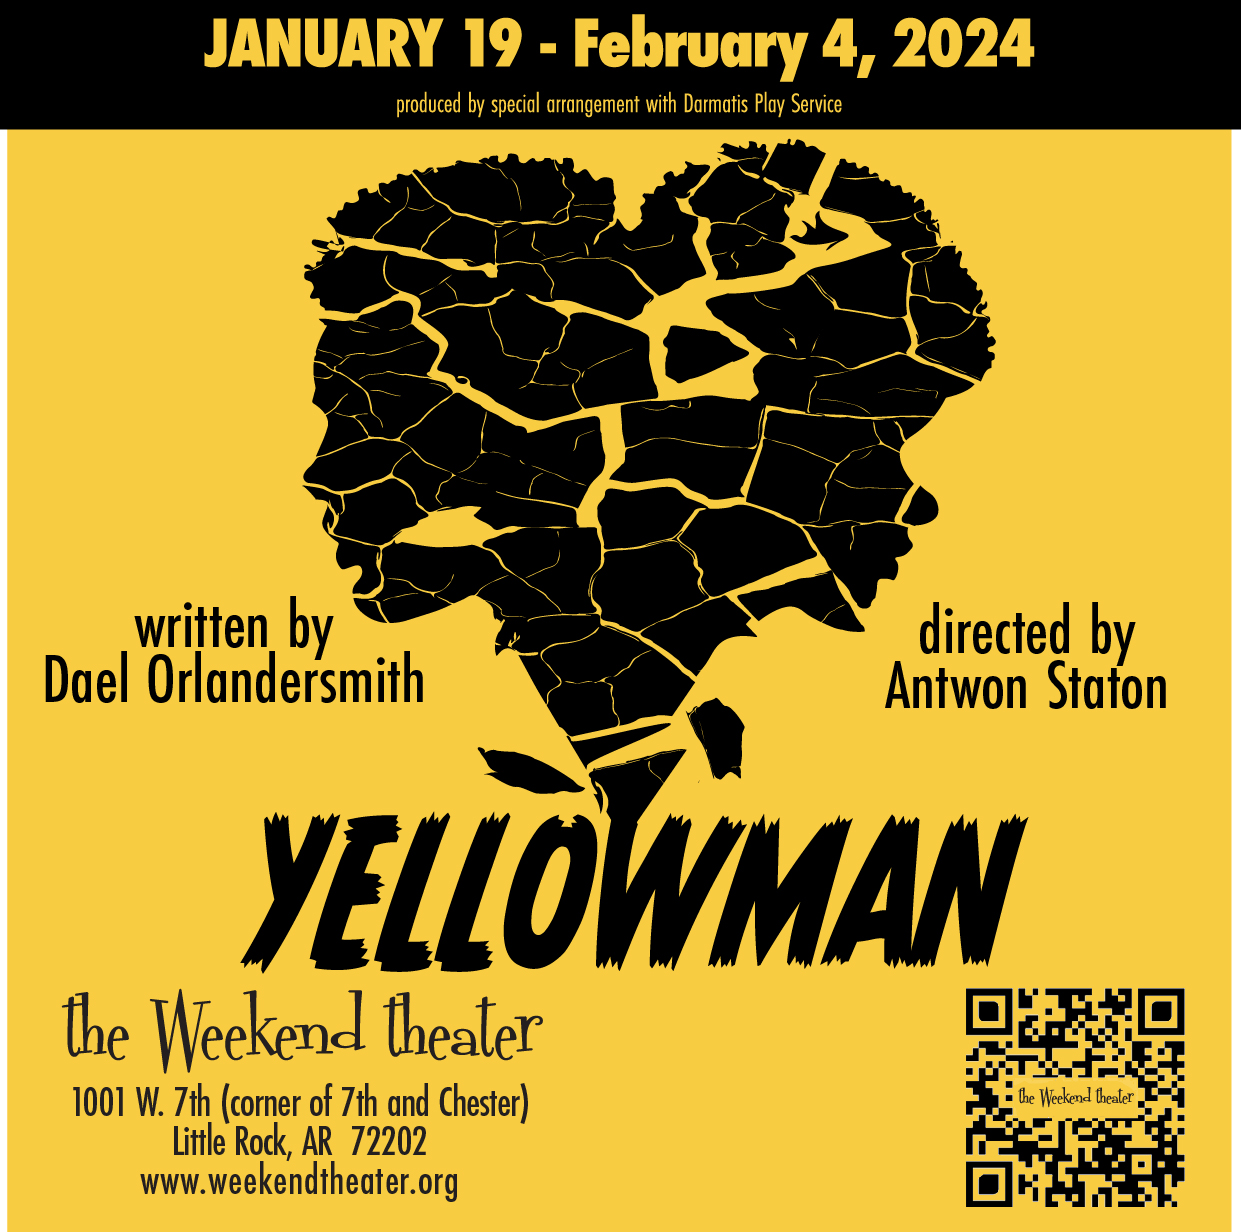 Announcing the cast of Yellowman by Dael Orlandersmith!